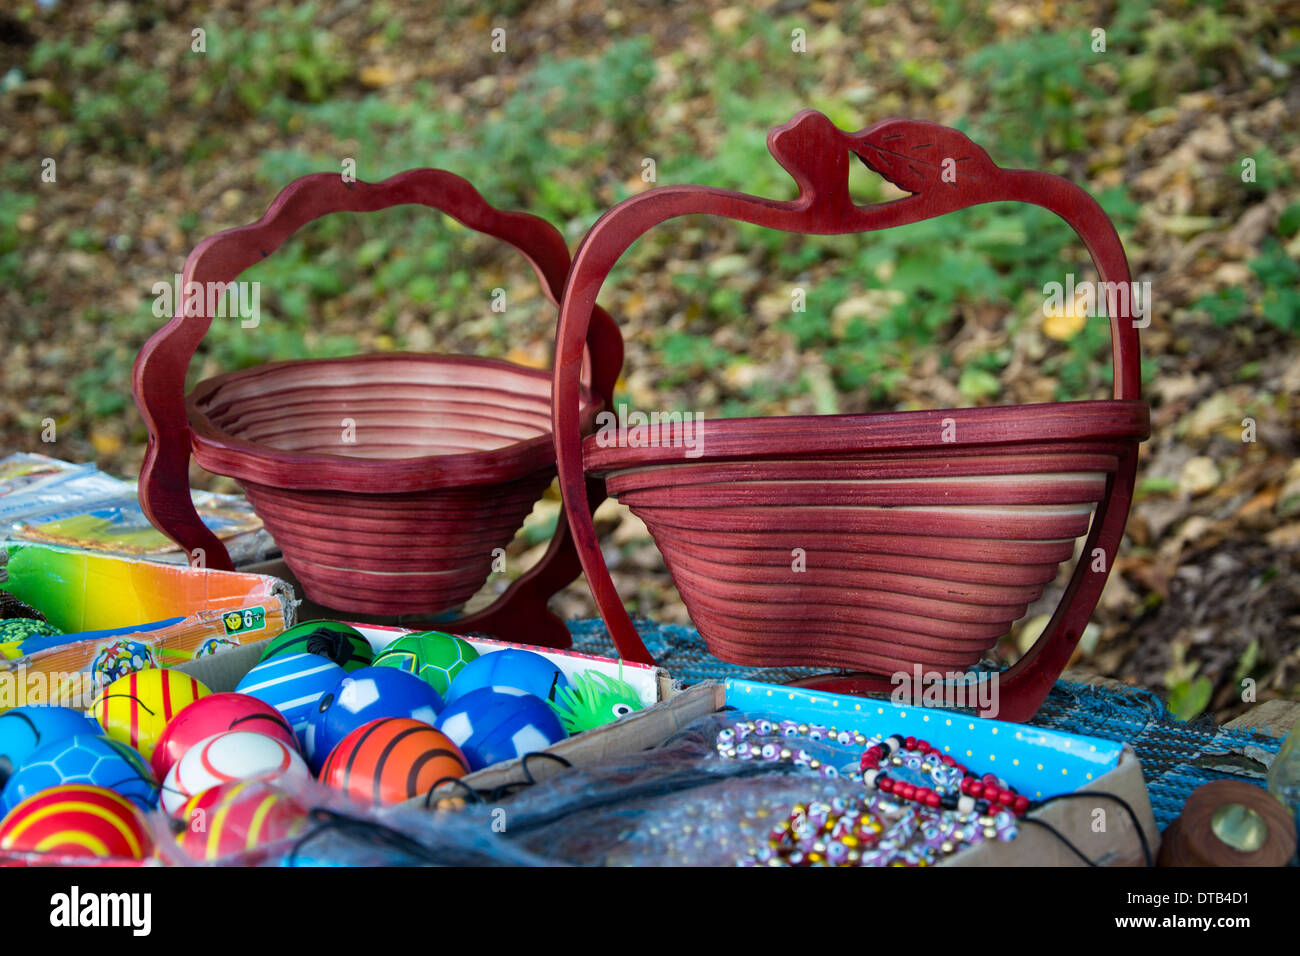 Baskets made of wood in the form of fruit Stock Photo